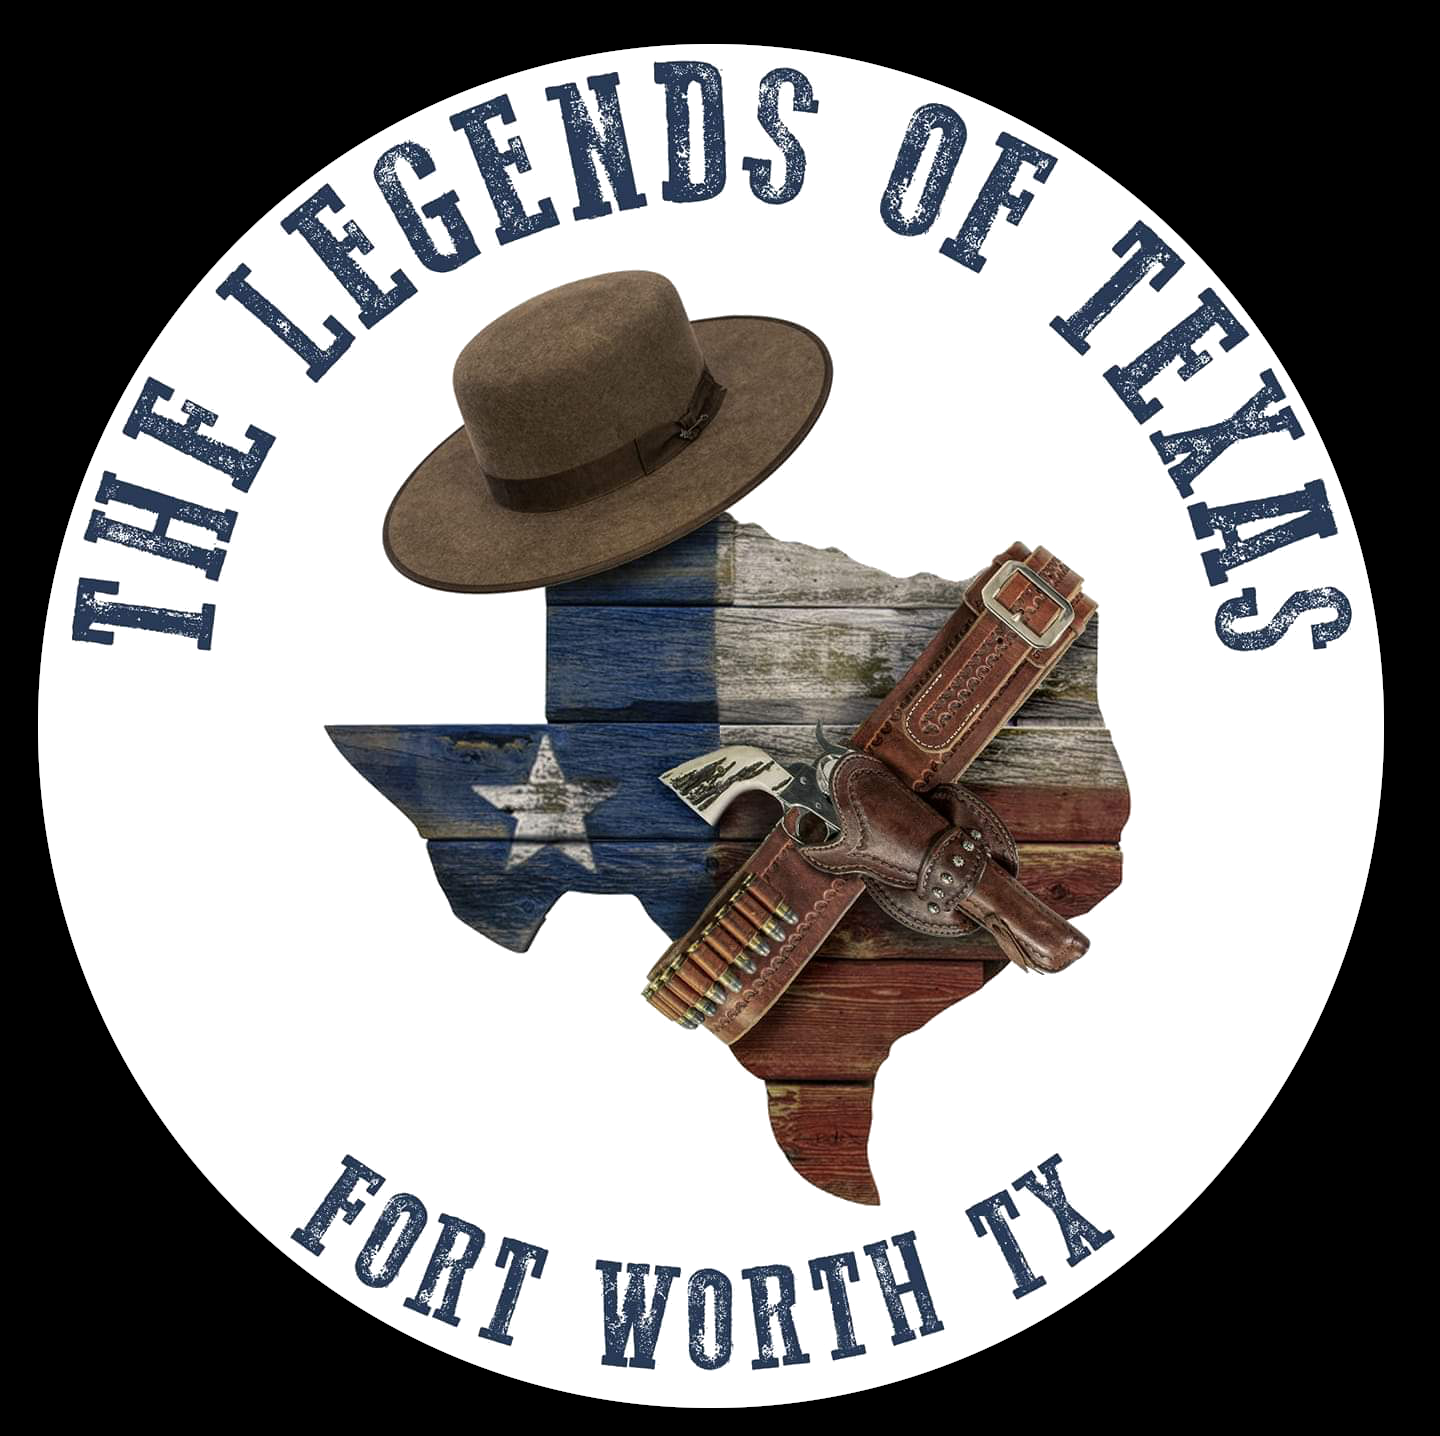 The Legends of Texas